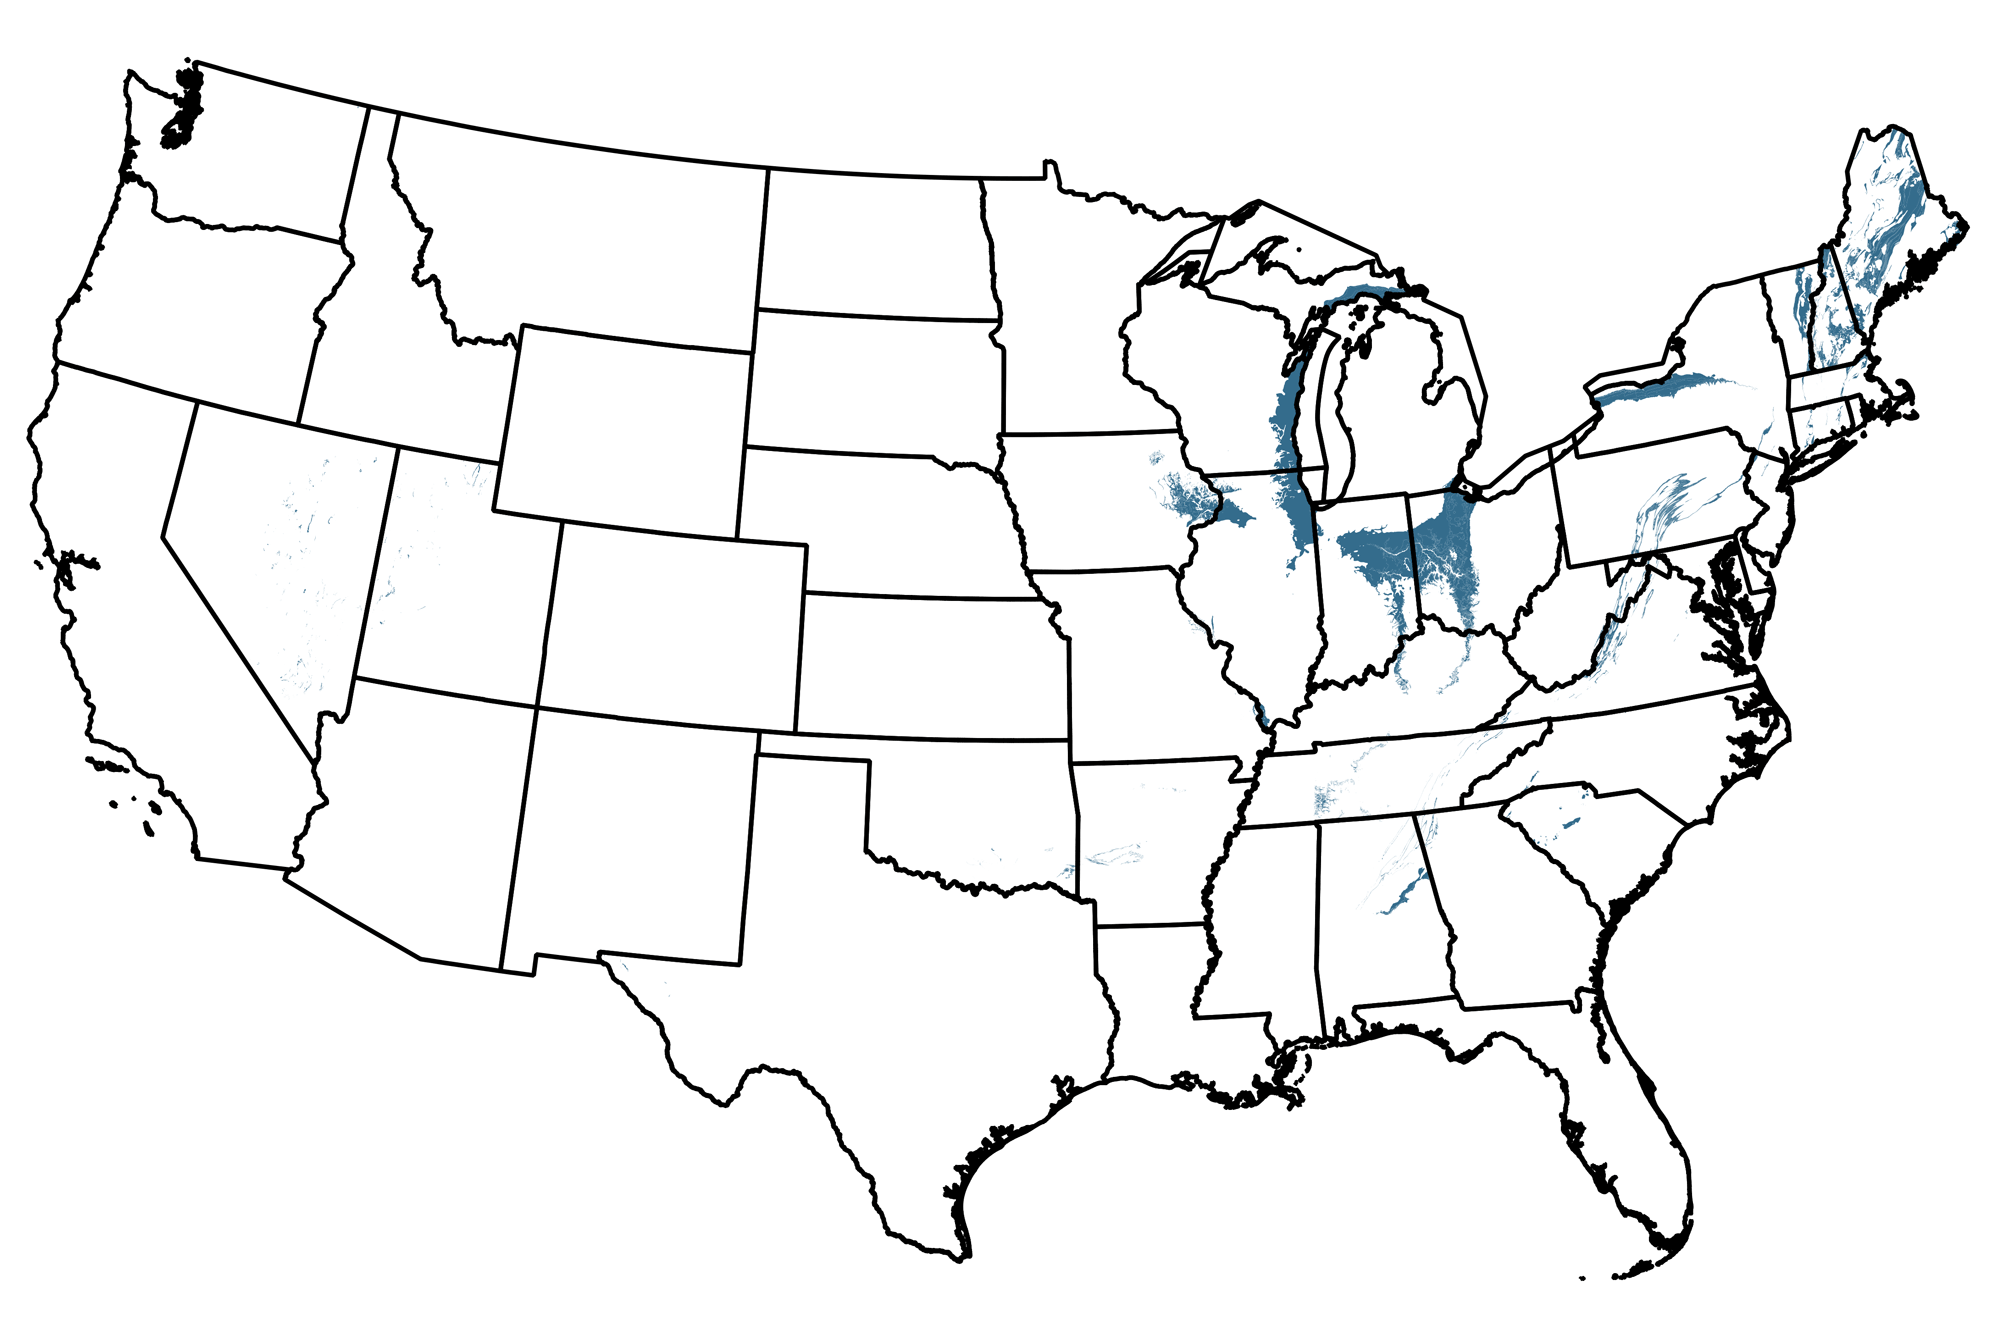 Map of the United States showing the locations of Silurian-aged rocks.